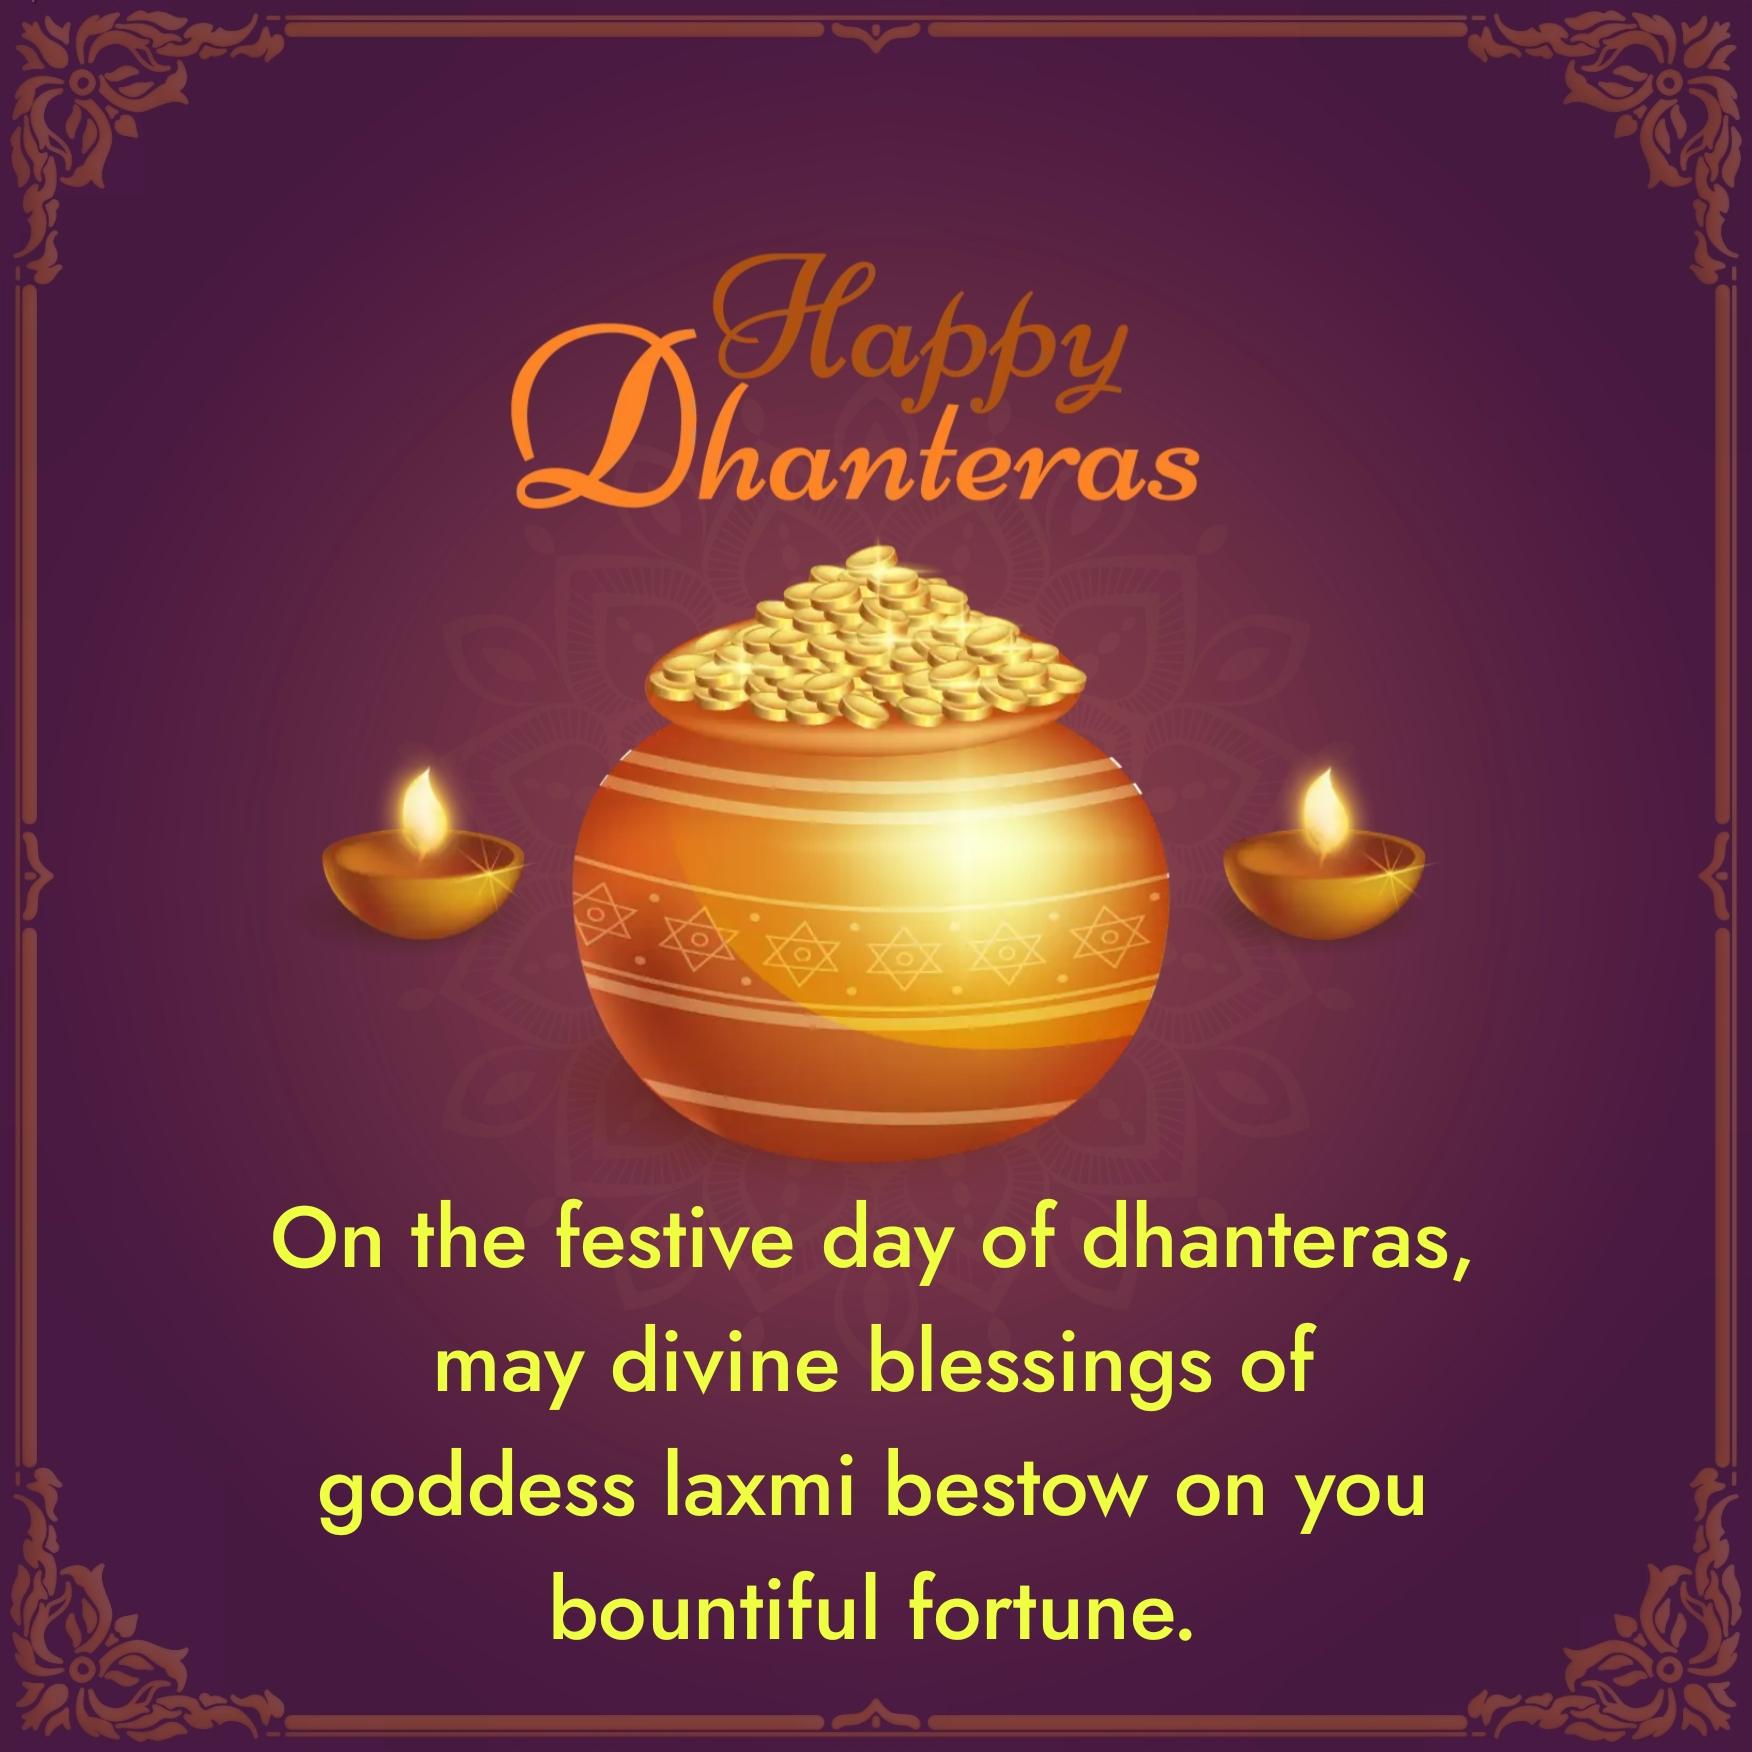 On the festive day of dhanteras may divine blessings